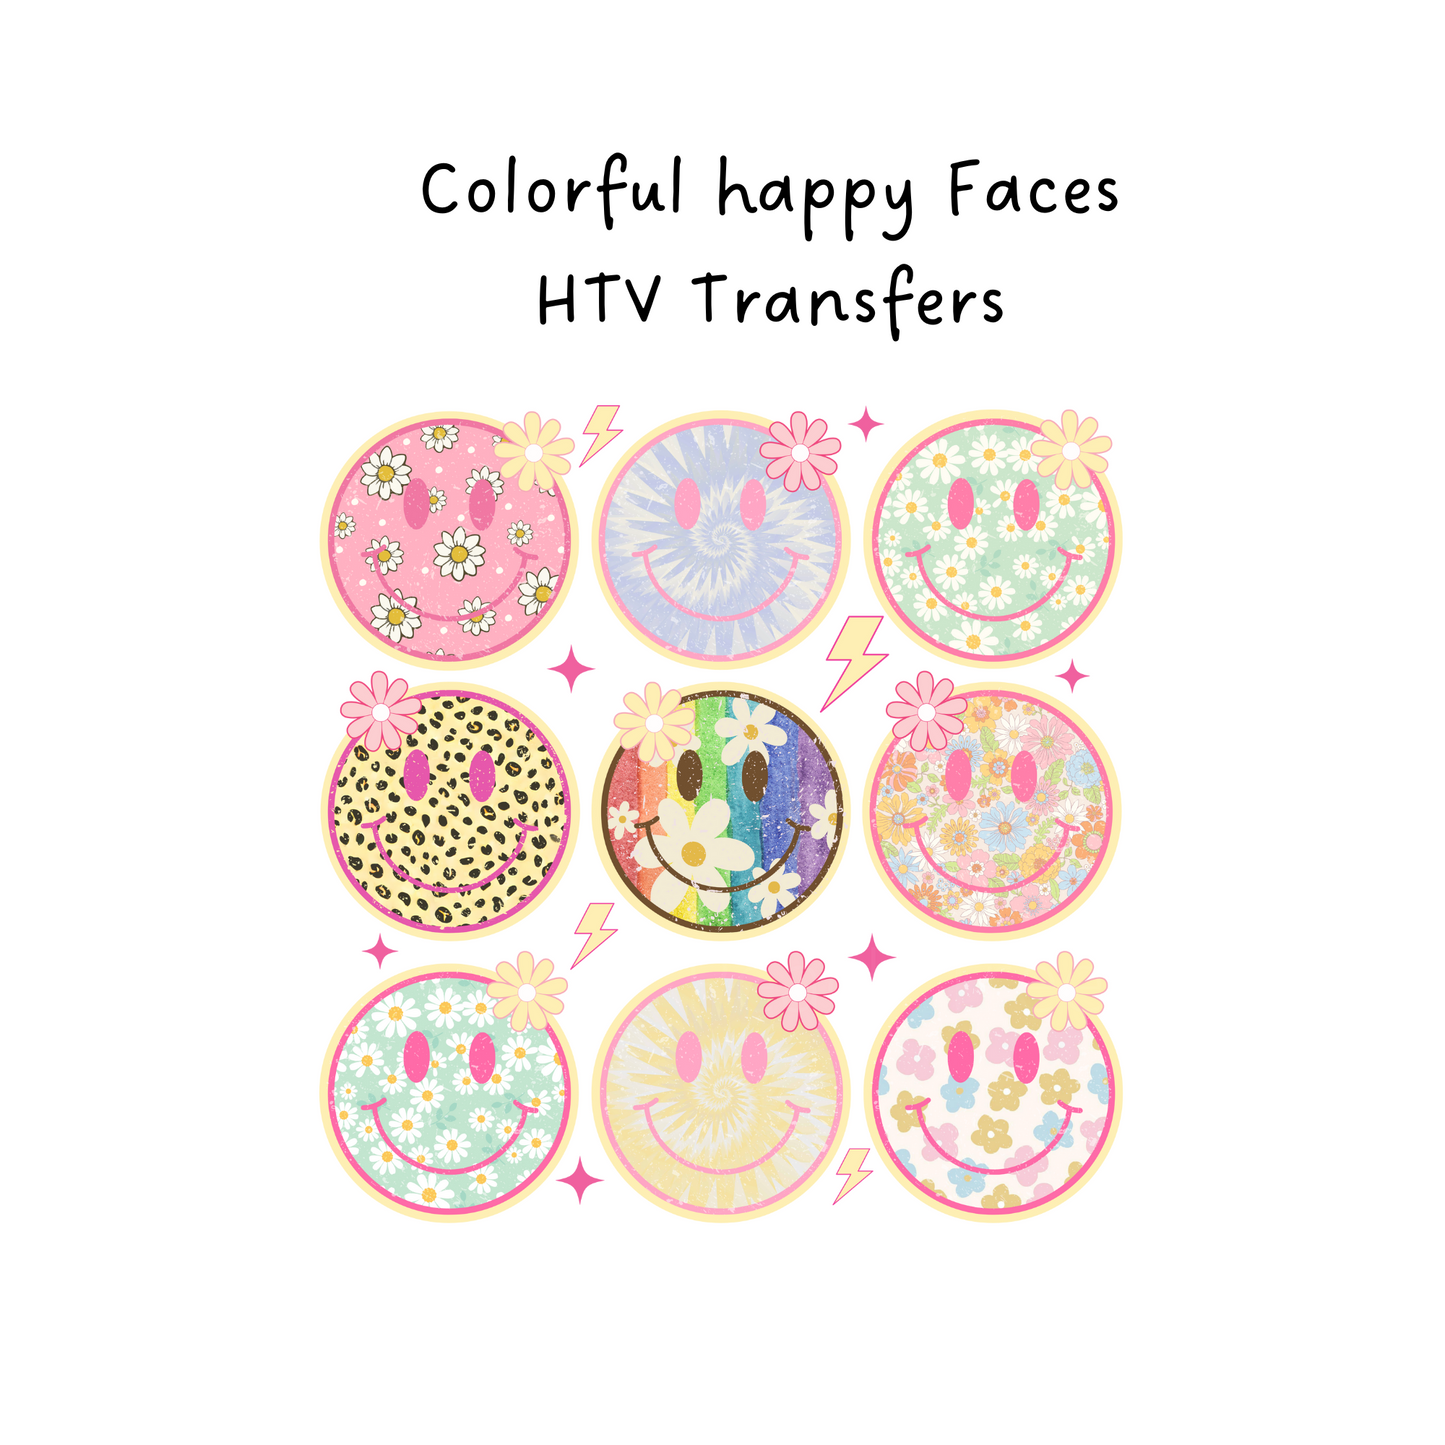 Colorful Happy faces HTV Transfer